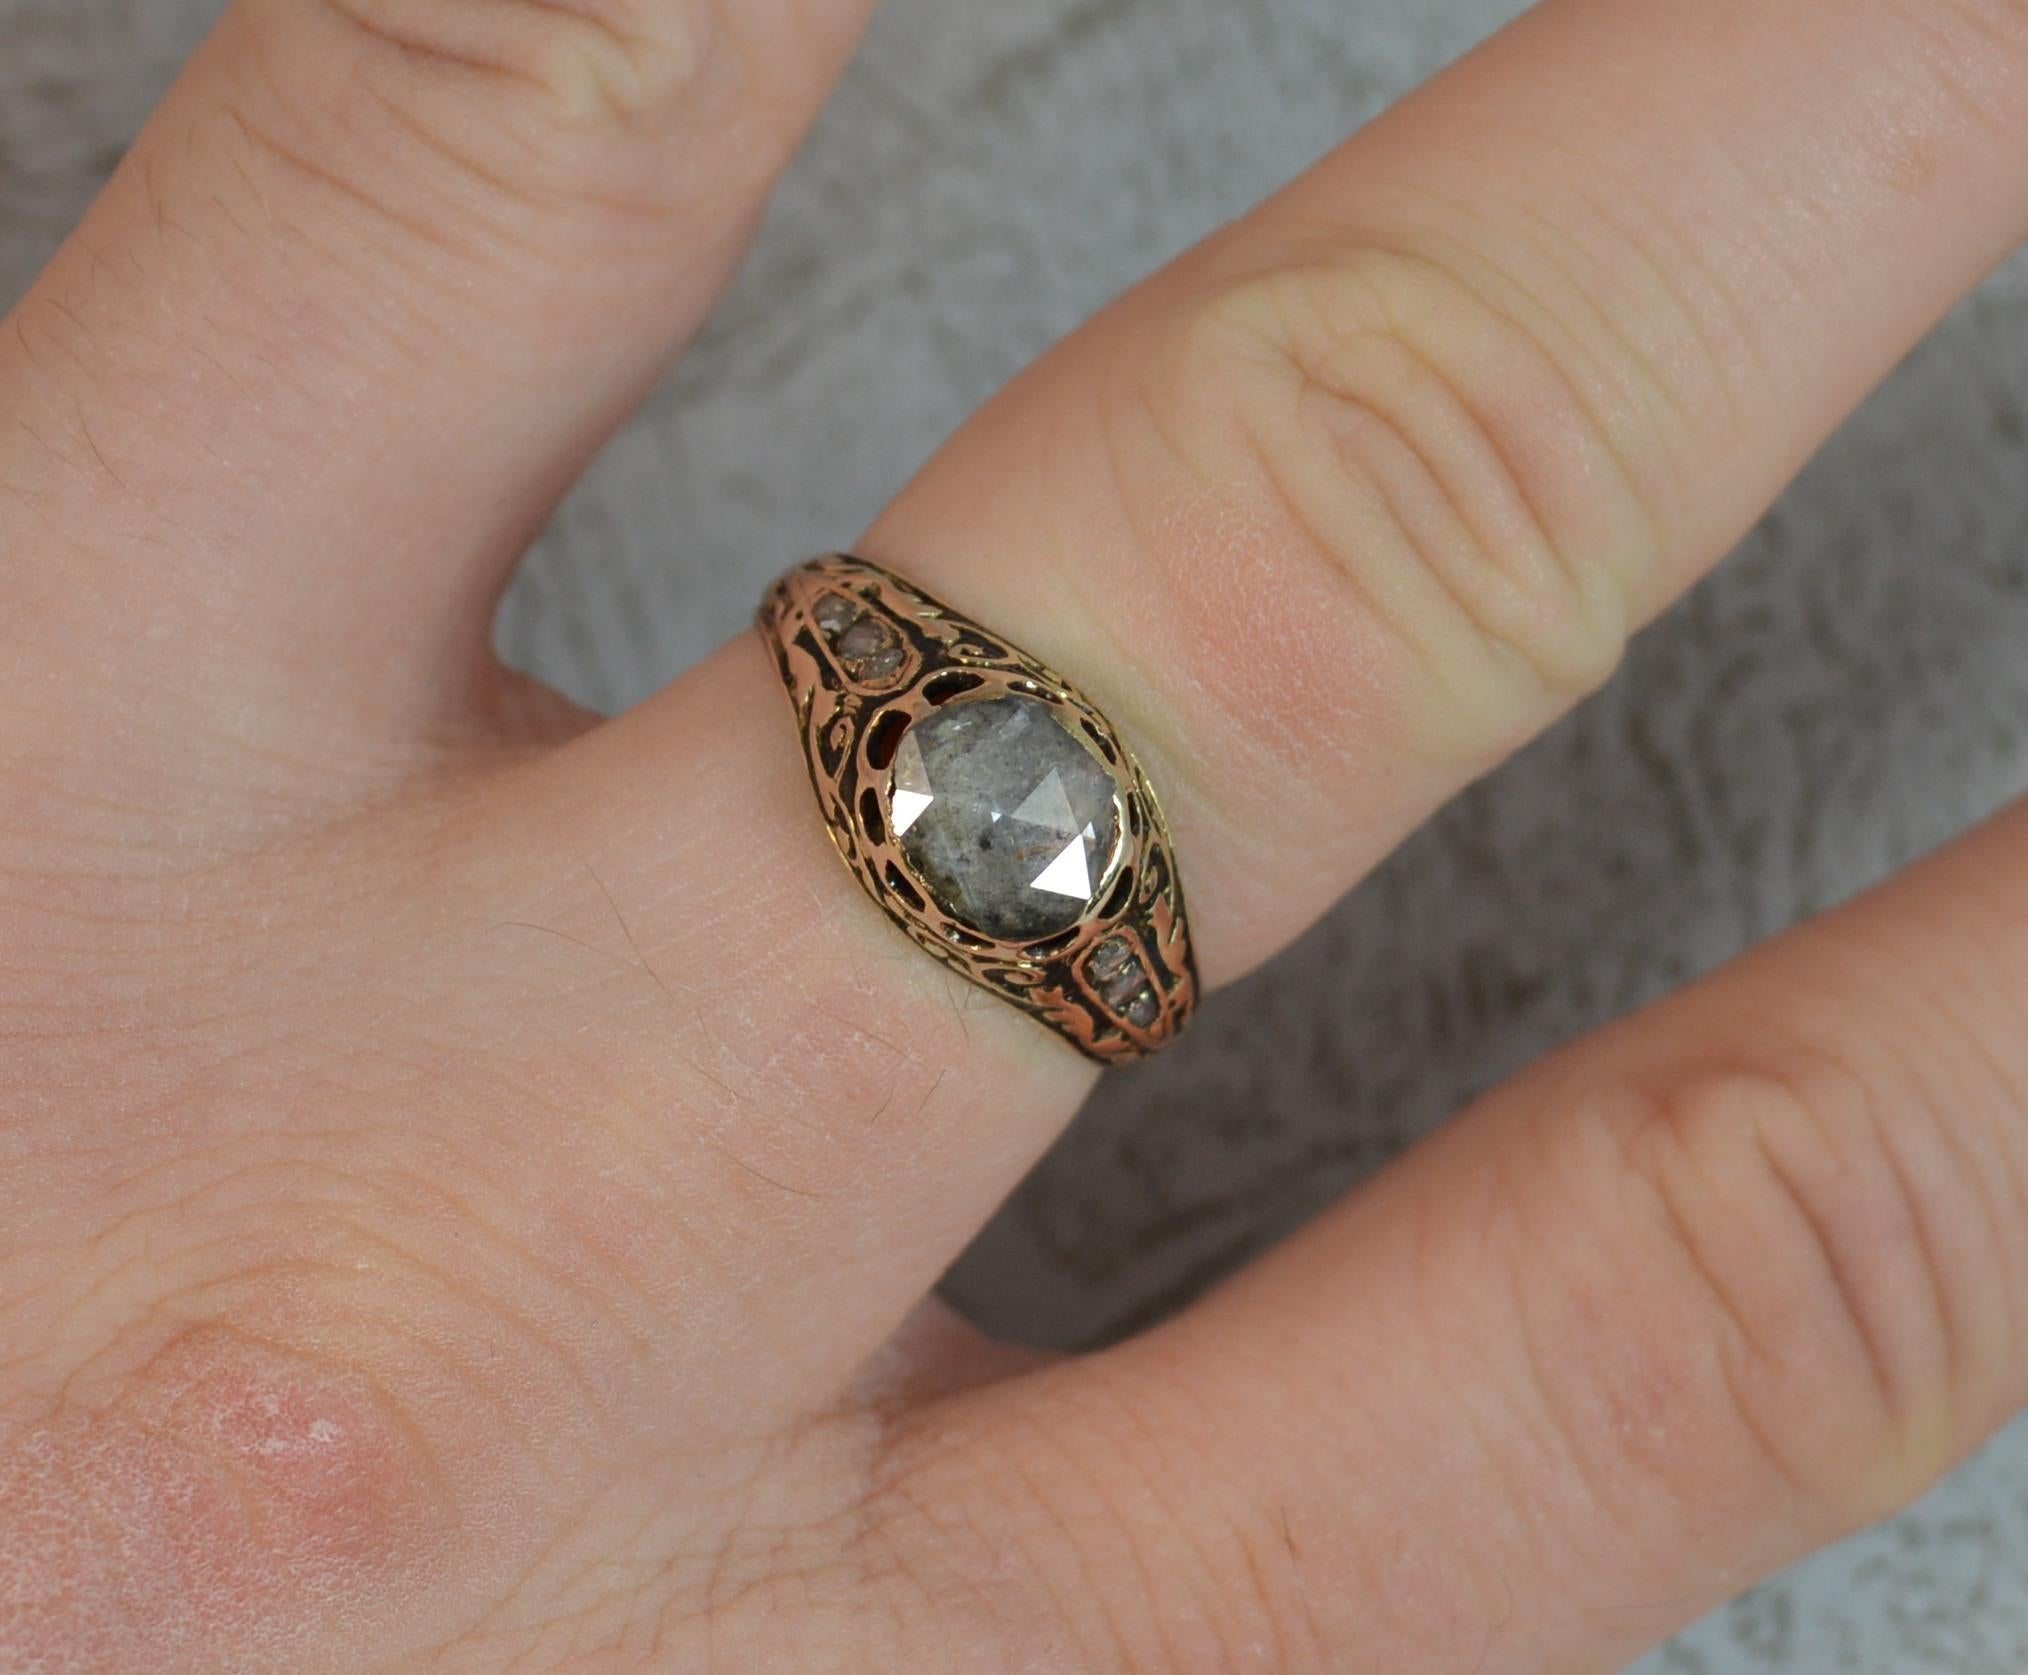 A very fine true Georgian period ring. c1770.
SIZE ; N UK, 6 3/4 US
Designed with a large rose cut diamond of oval shape in closed foiled back bezel setting. 6.6mm x 7.6mm approx. 
A fine 15 carat gold shank three rose cut diamonds to the shoulders